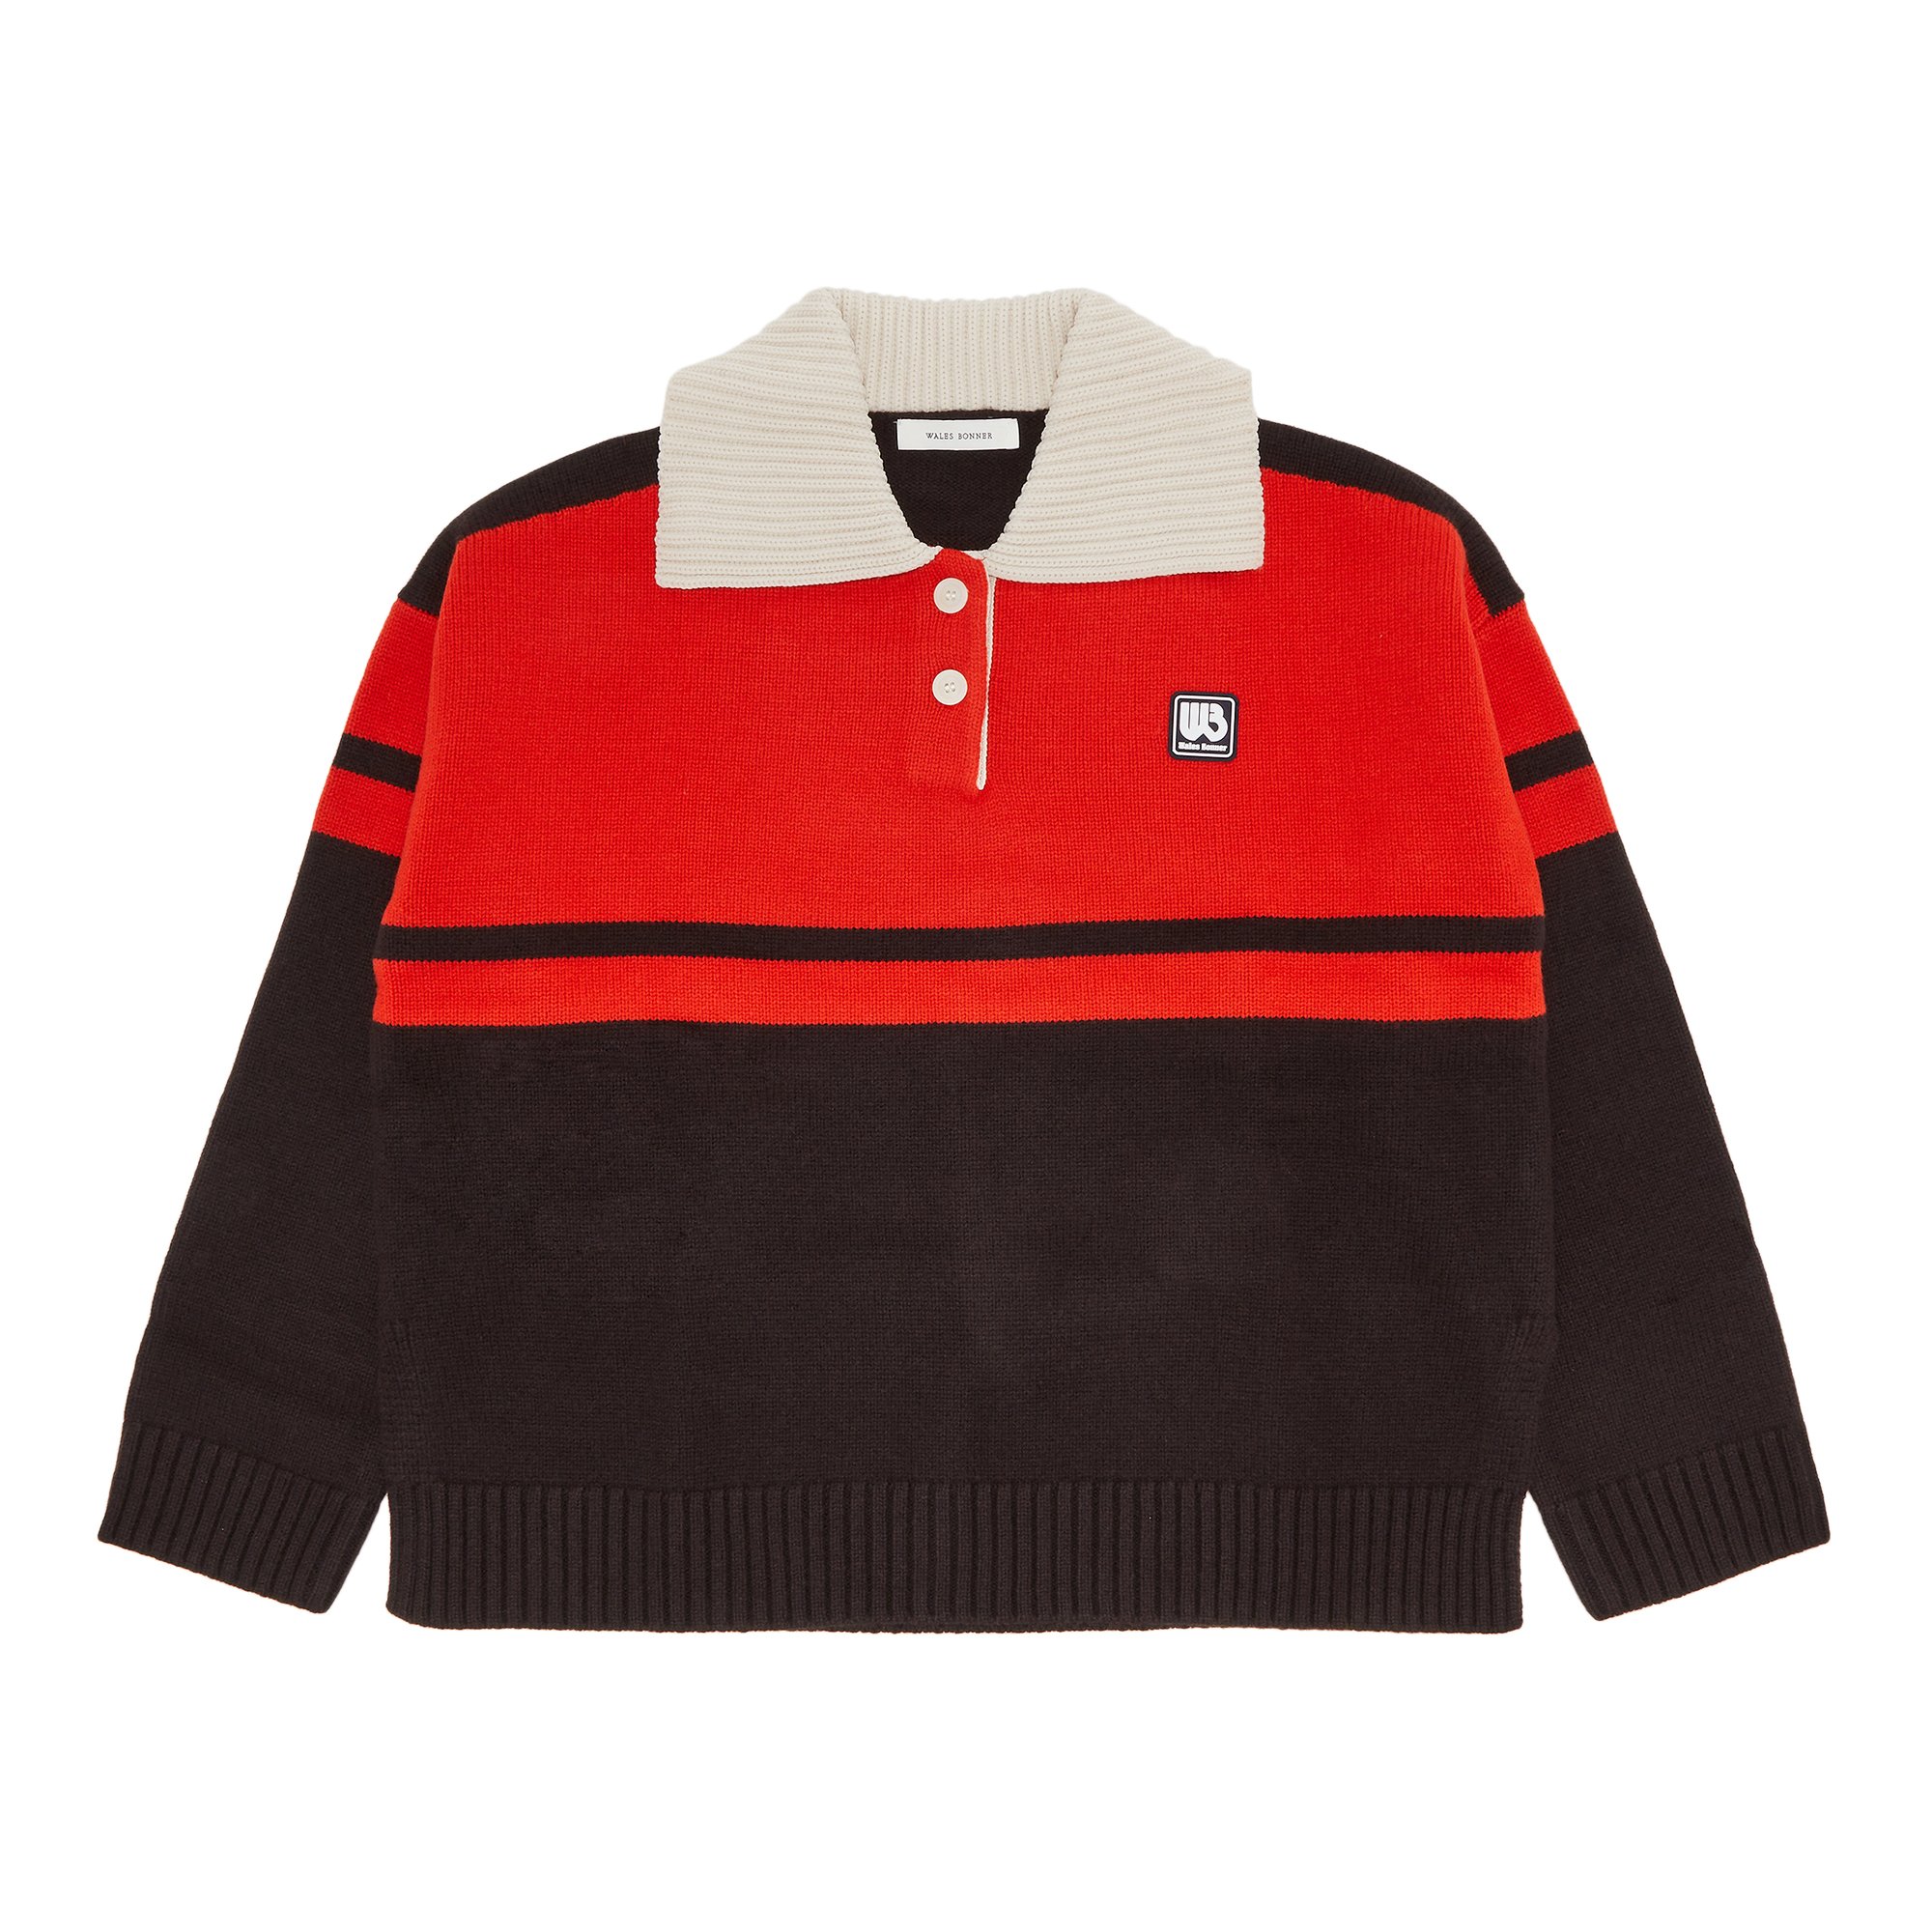 Wales Bonner Calm Polo 'Red/Black/Beige'